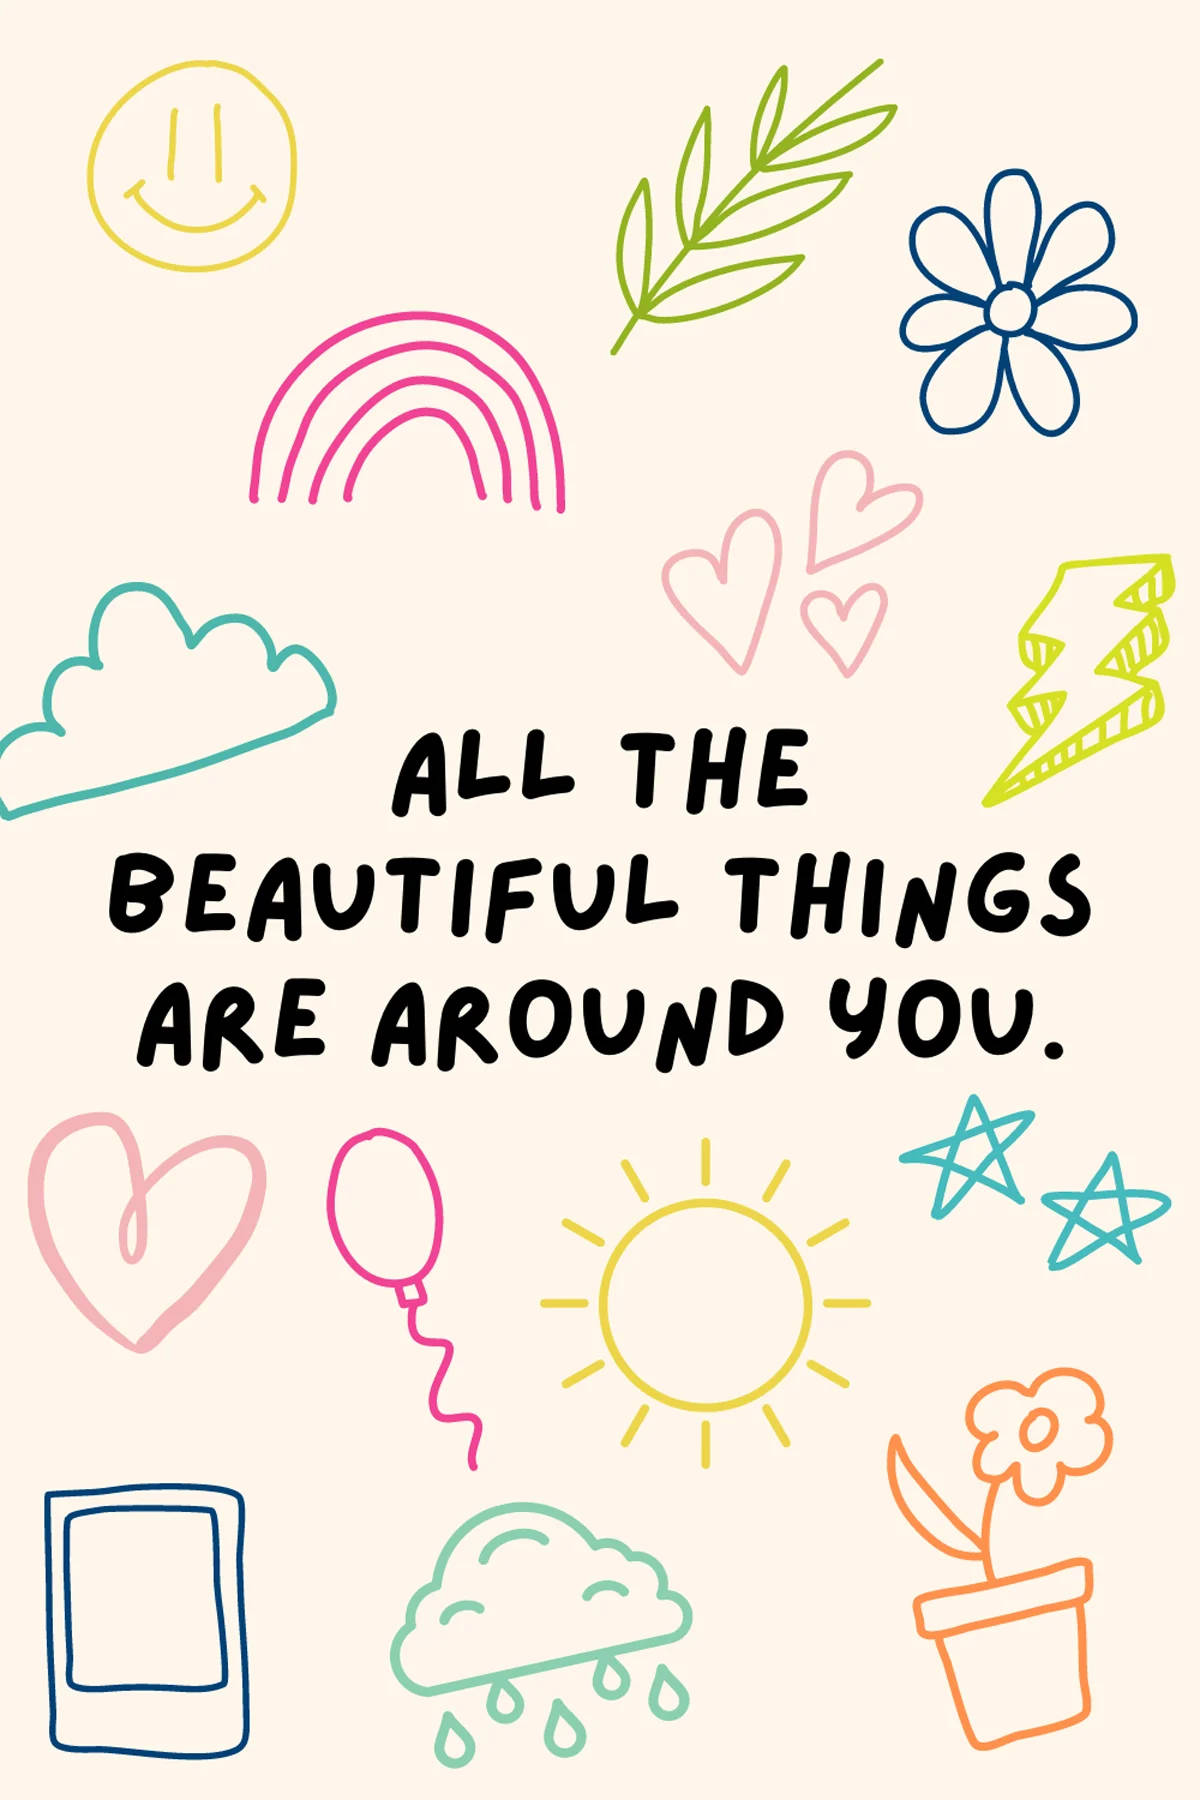 All the beautiful things are around you. - Quotes